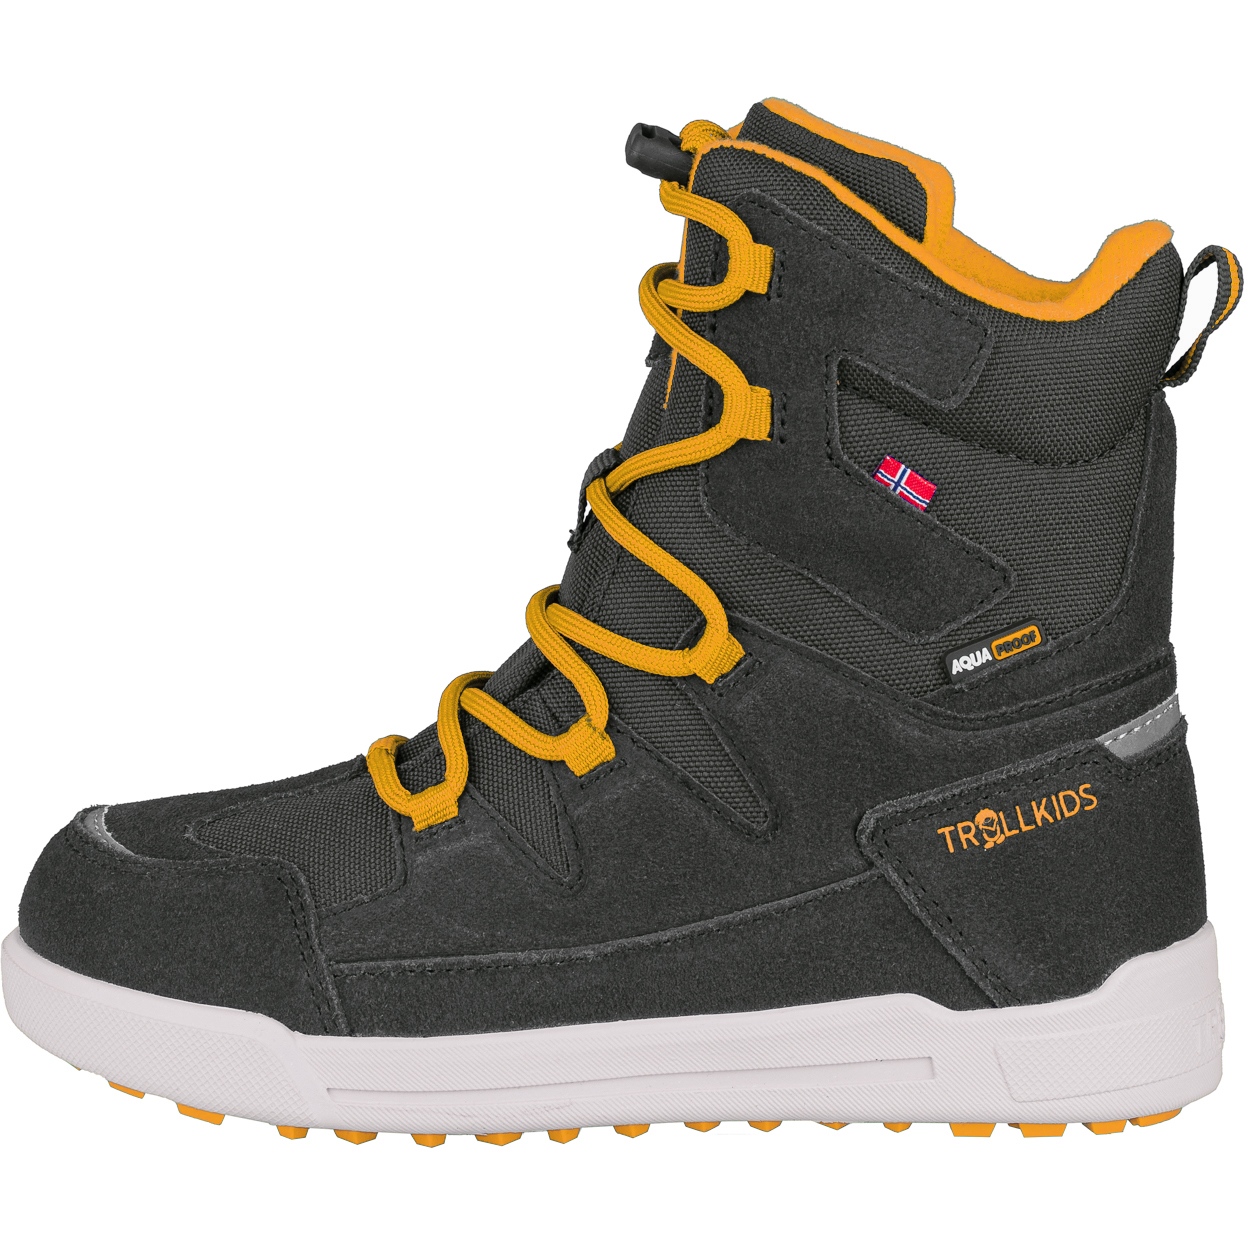 Picture of Trollkids Finnmark Winter Boots Kids - Anthracite/Golden Yellow